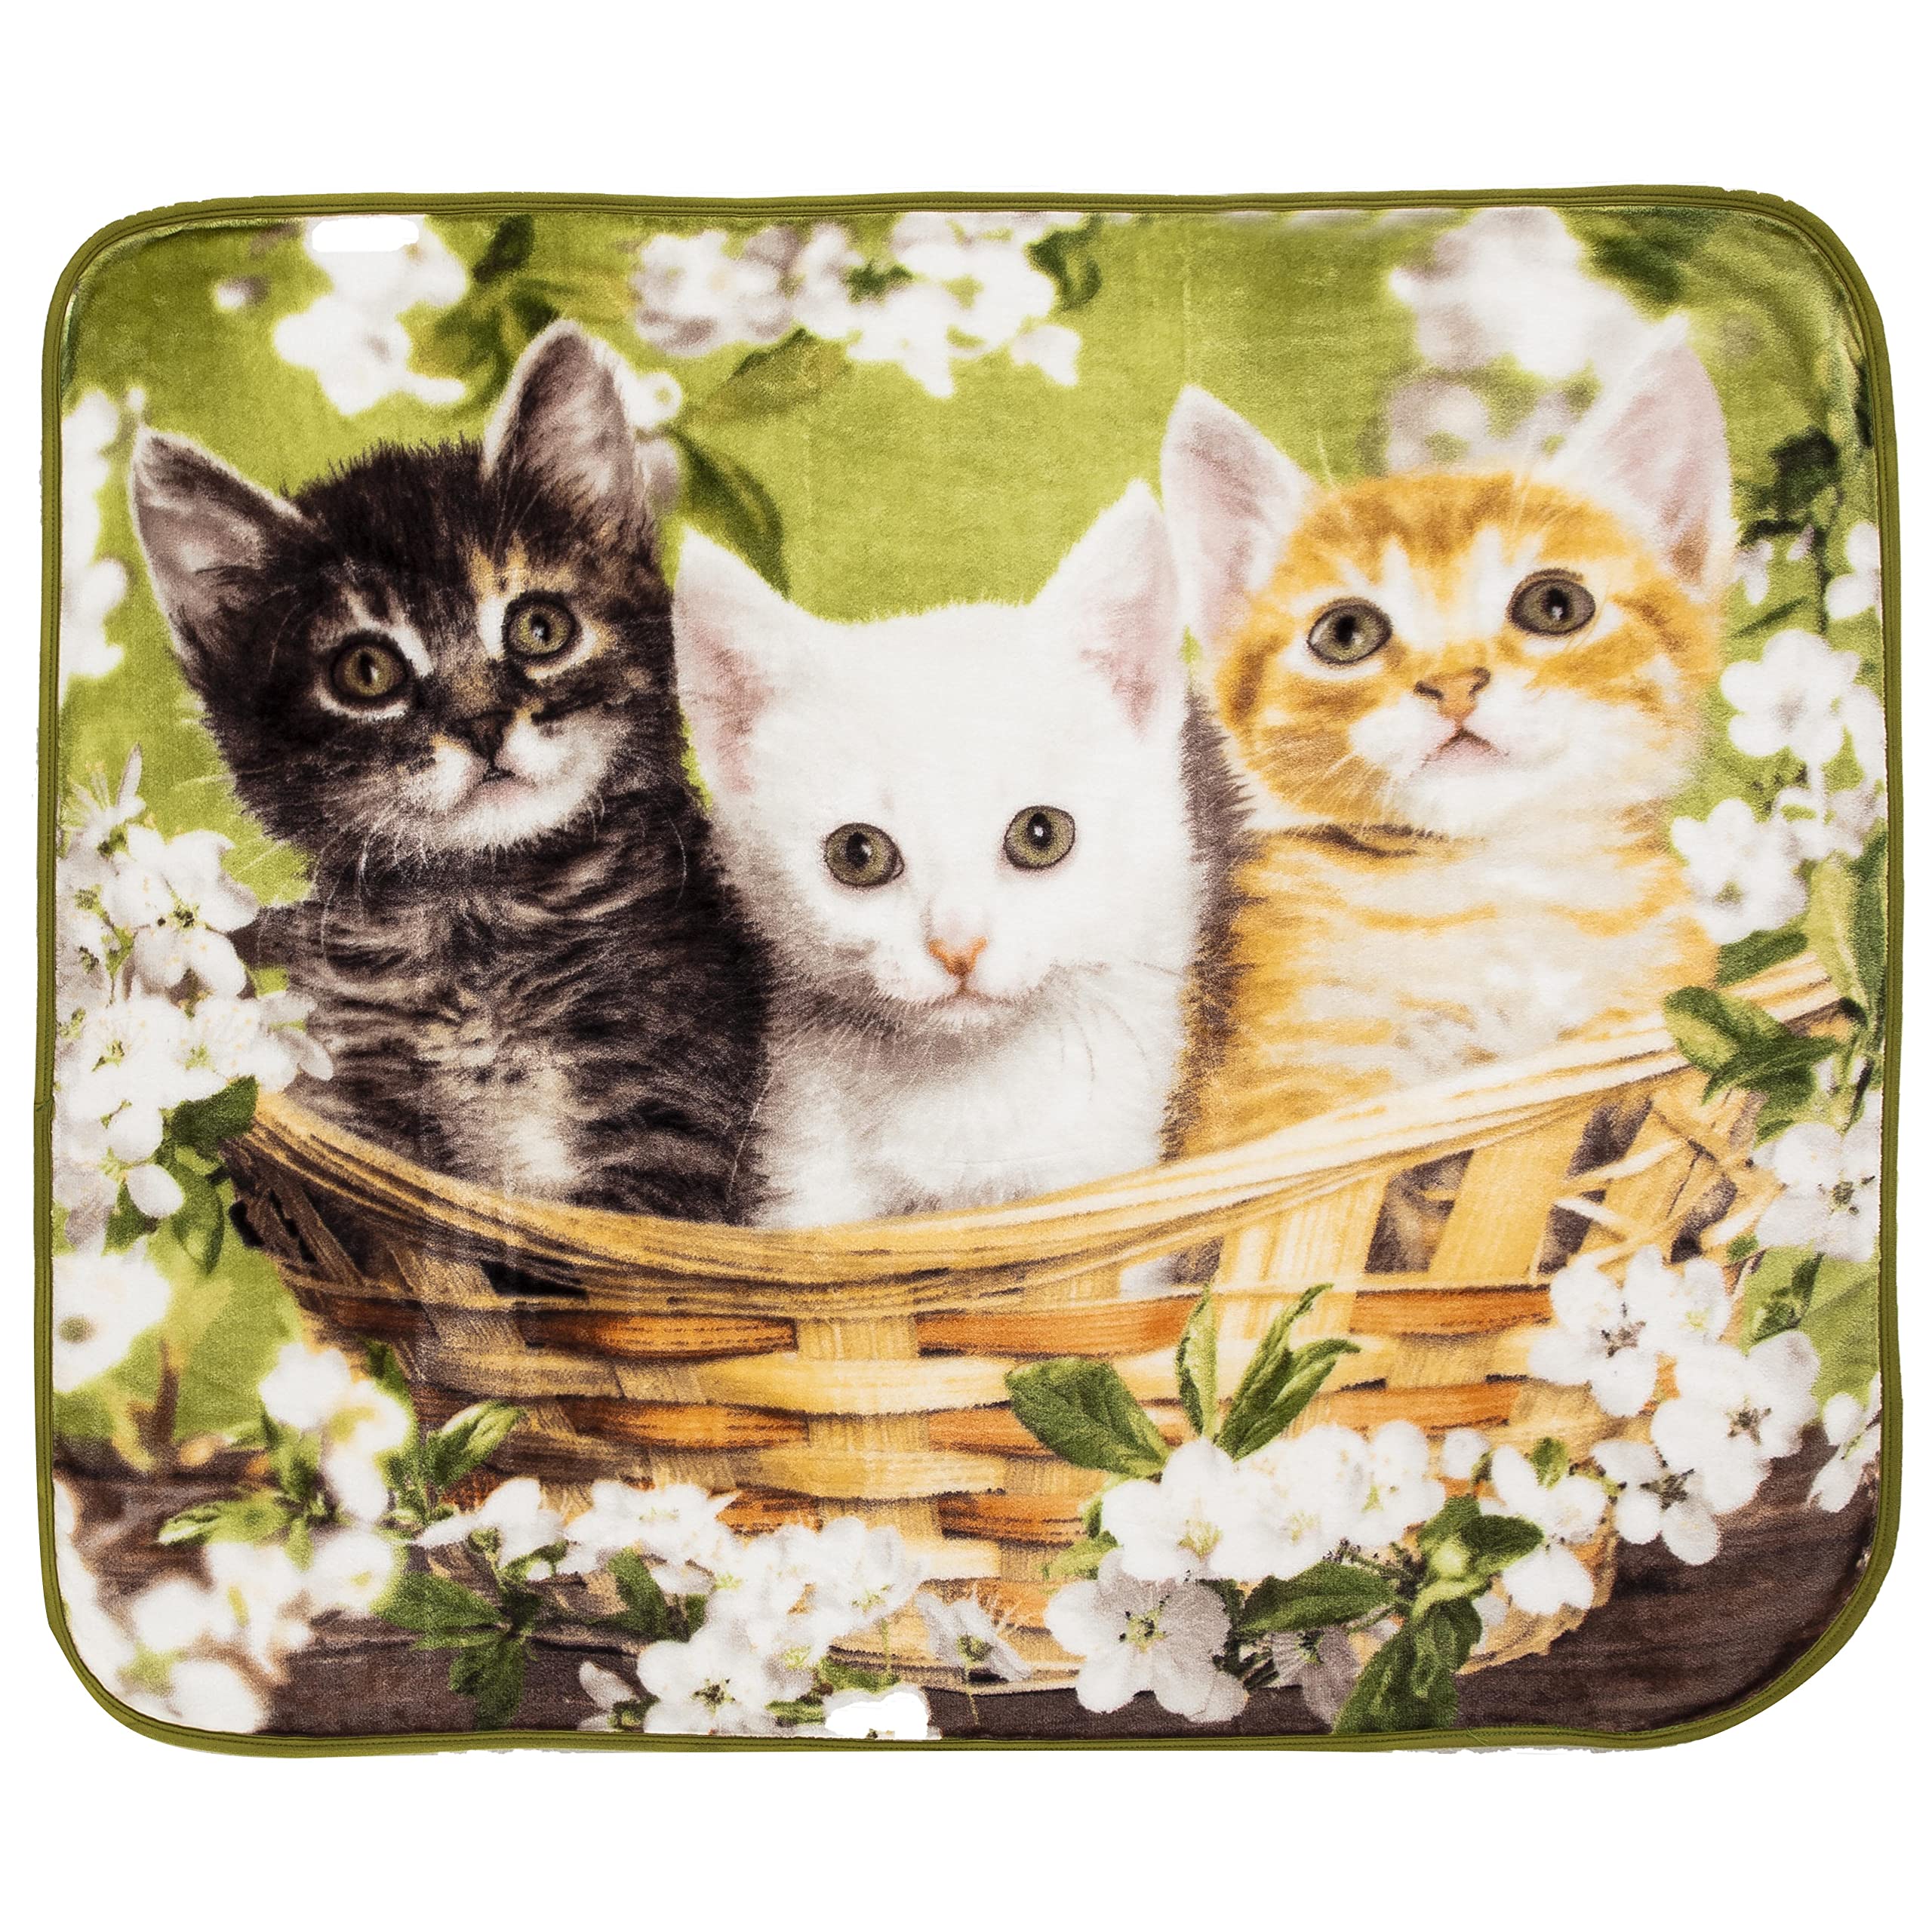 50" x 60" Northwest Raschel Throw Blanket (Basket of Kittens) $6.90 + Free Shipping w/ Prime or on orders over $35